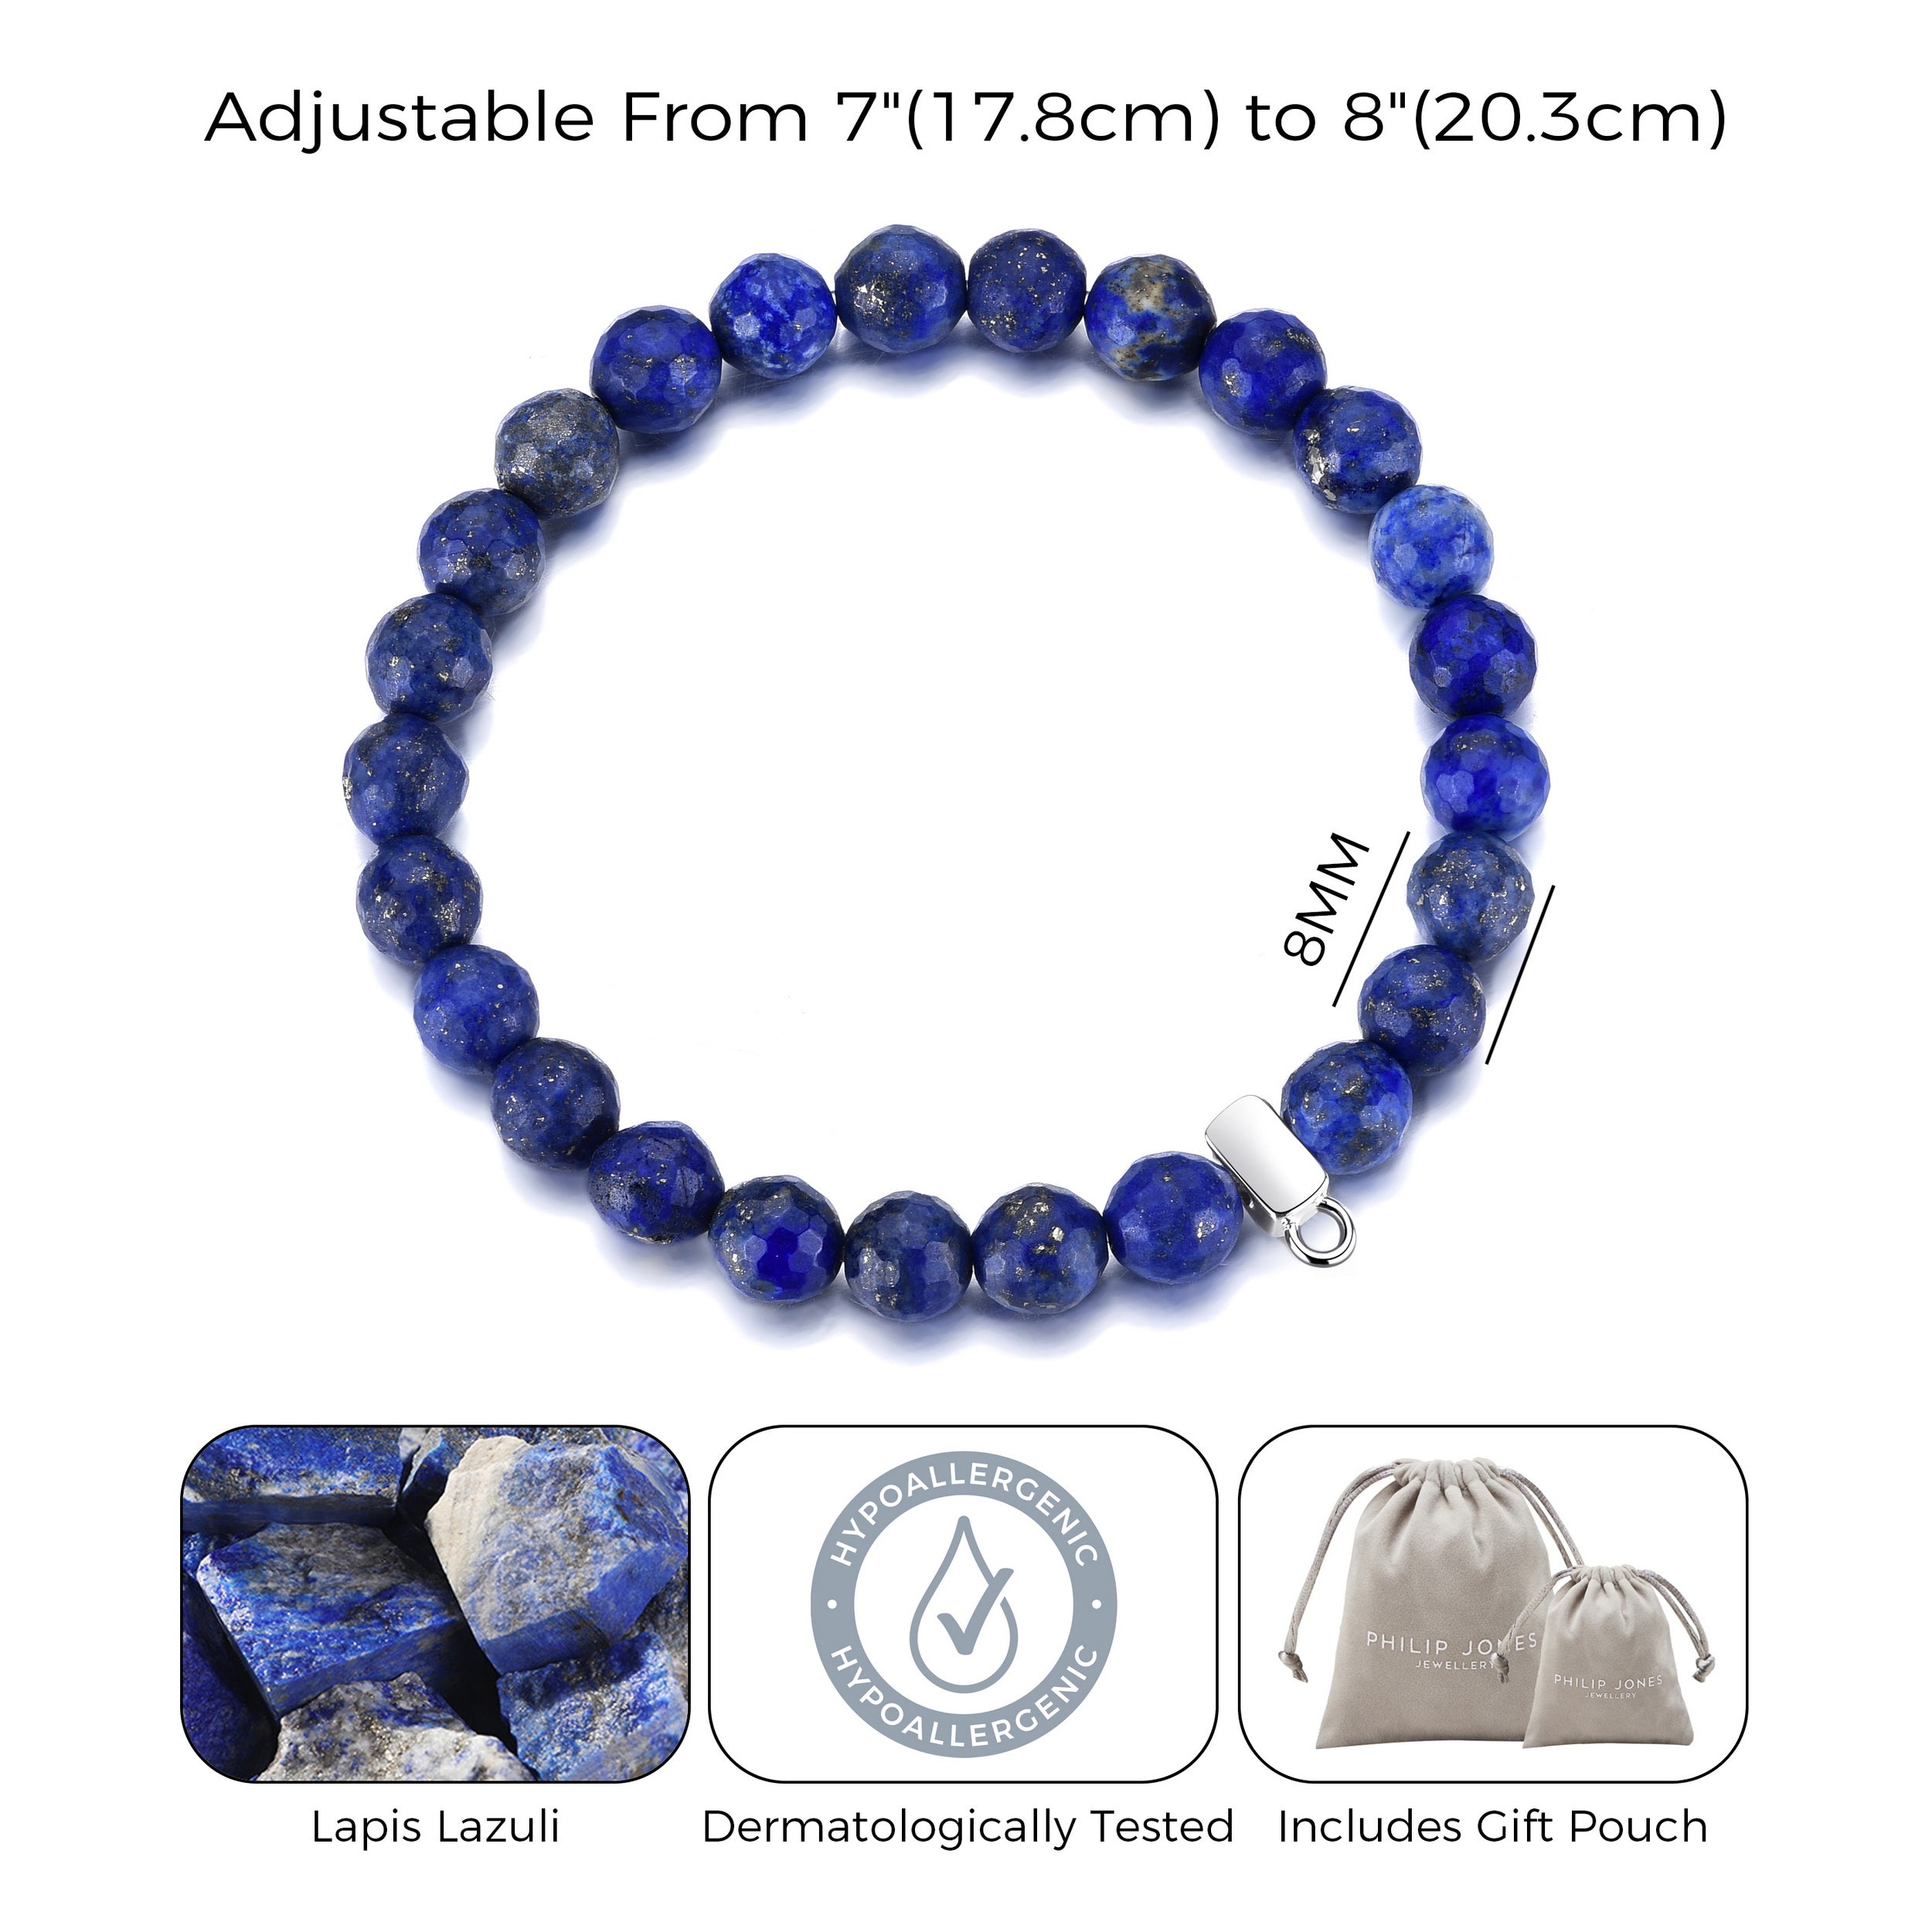 Faceted Lapis Gemstone Stretch Bracelet with Charm Created with Zircondia® Crystals